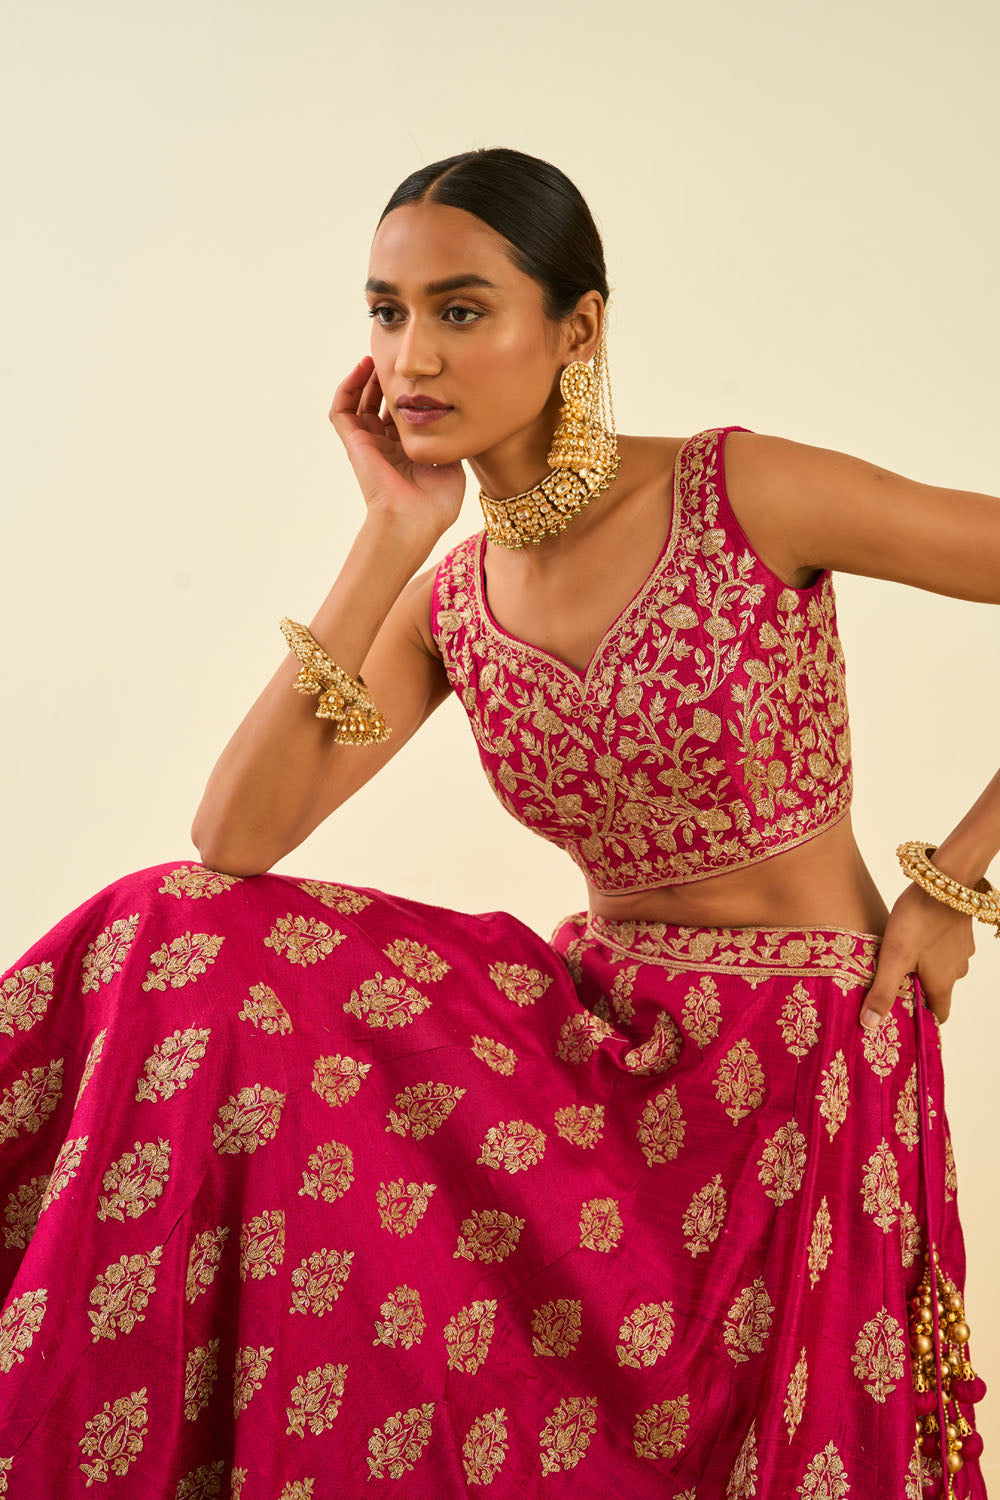 Gold Blouse - Hot pink Lehenga with Gold Dupatta now at Trendroots